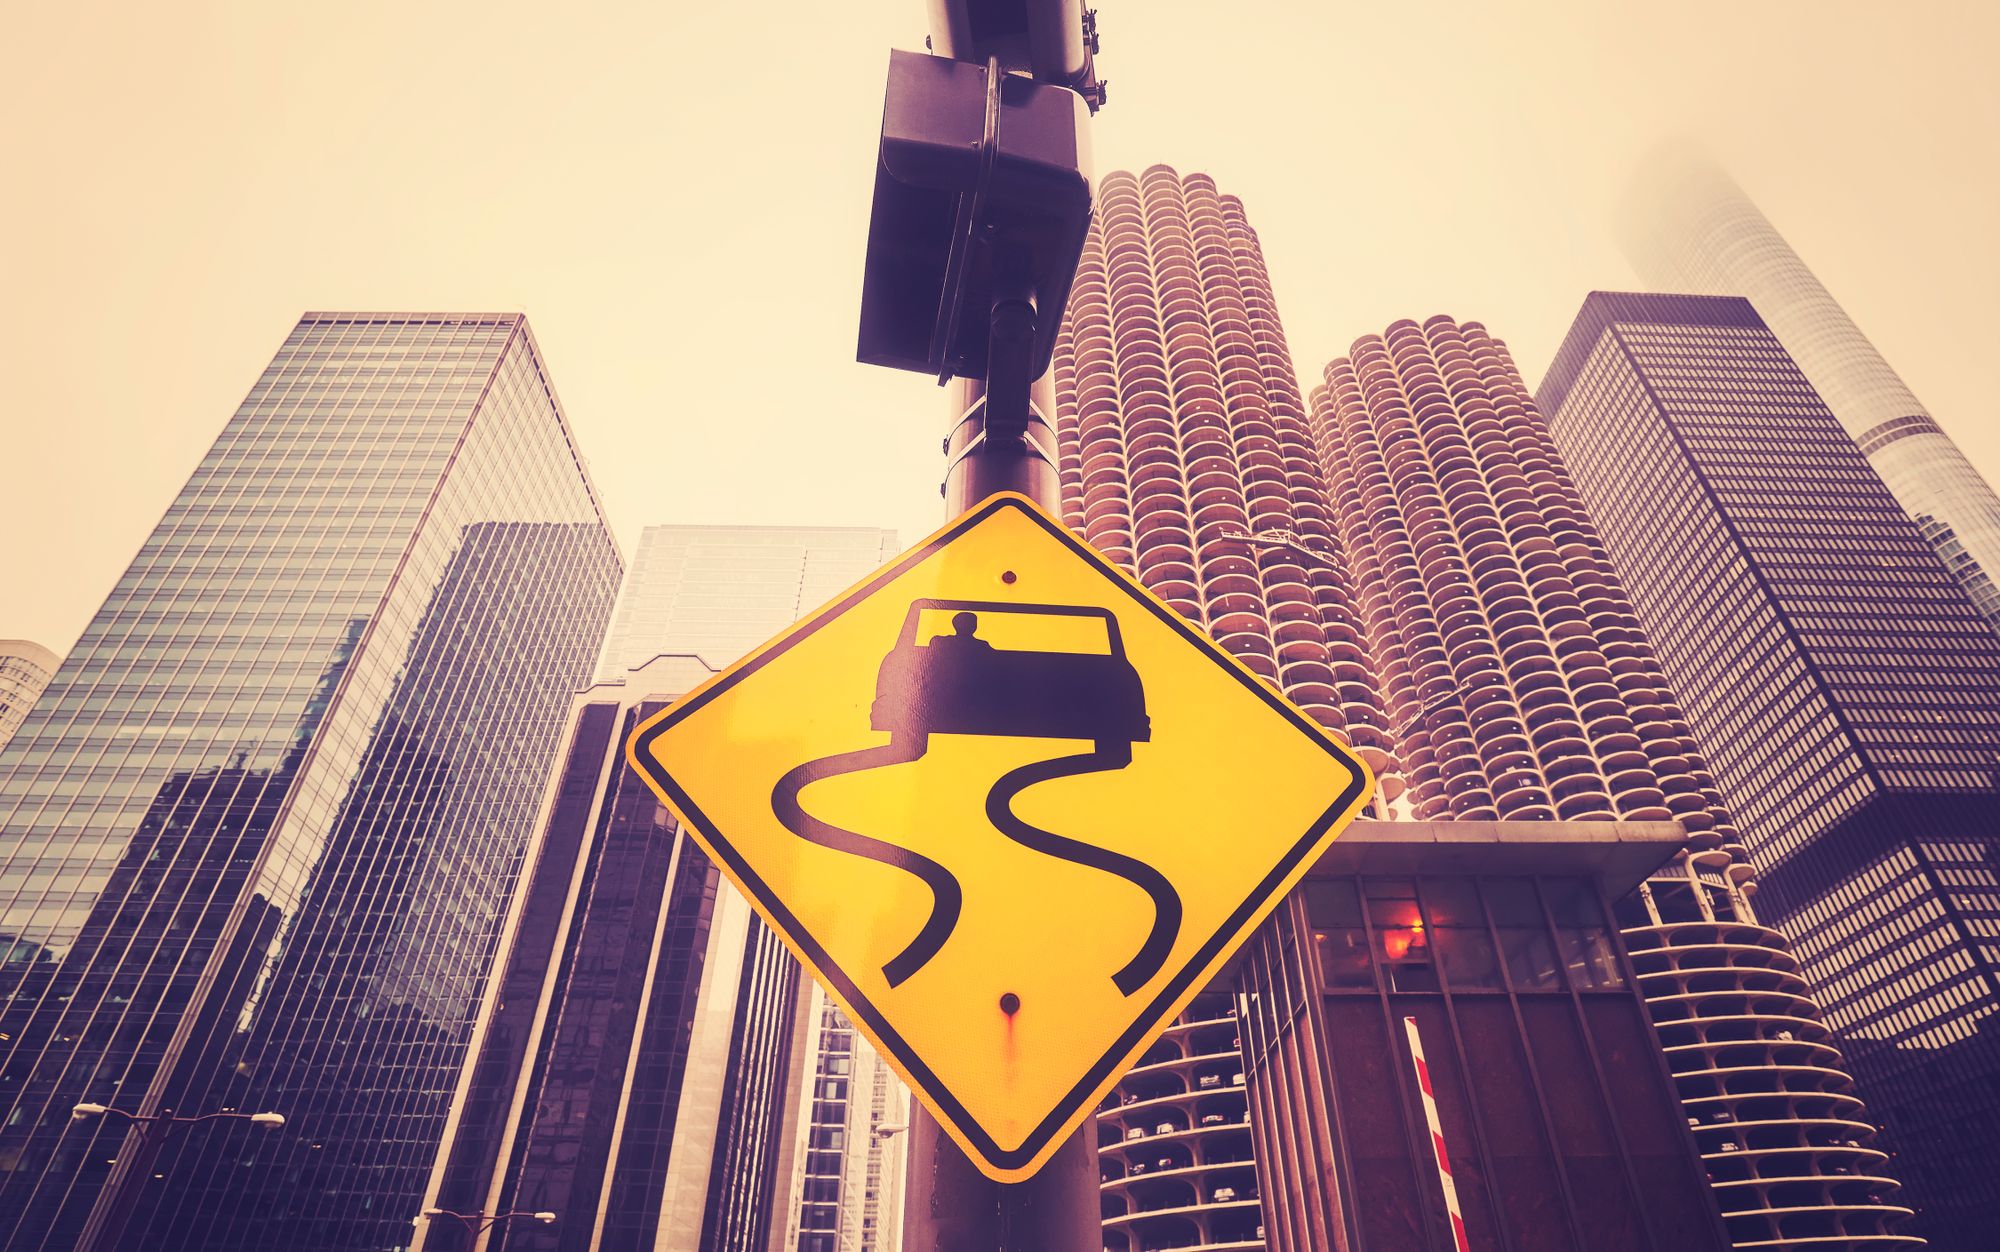 color-toned-slippery-road-sign-with-chicago-skyscr-PJWN4YQ